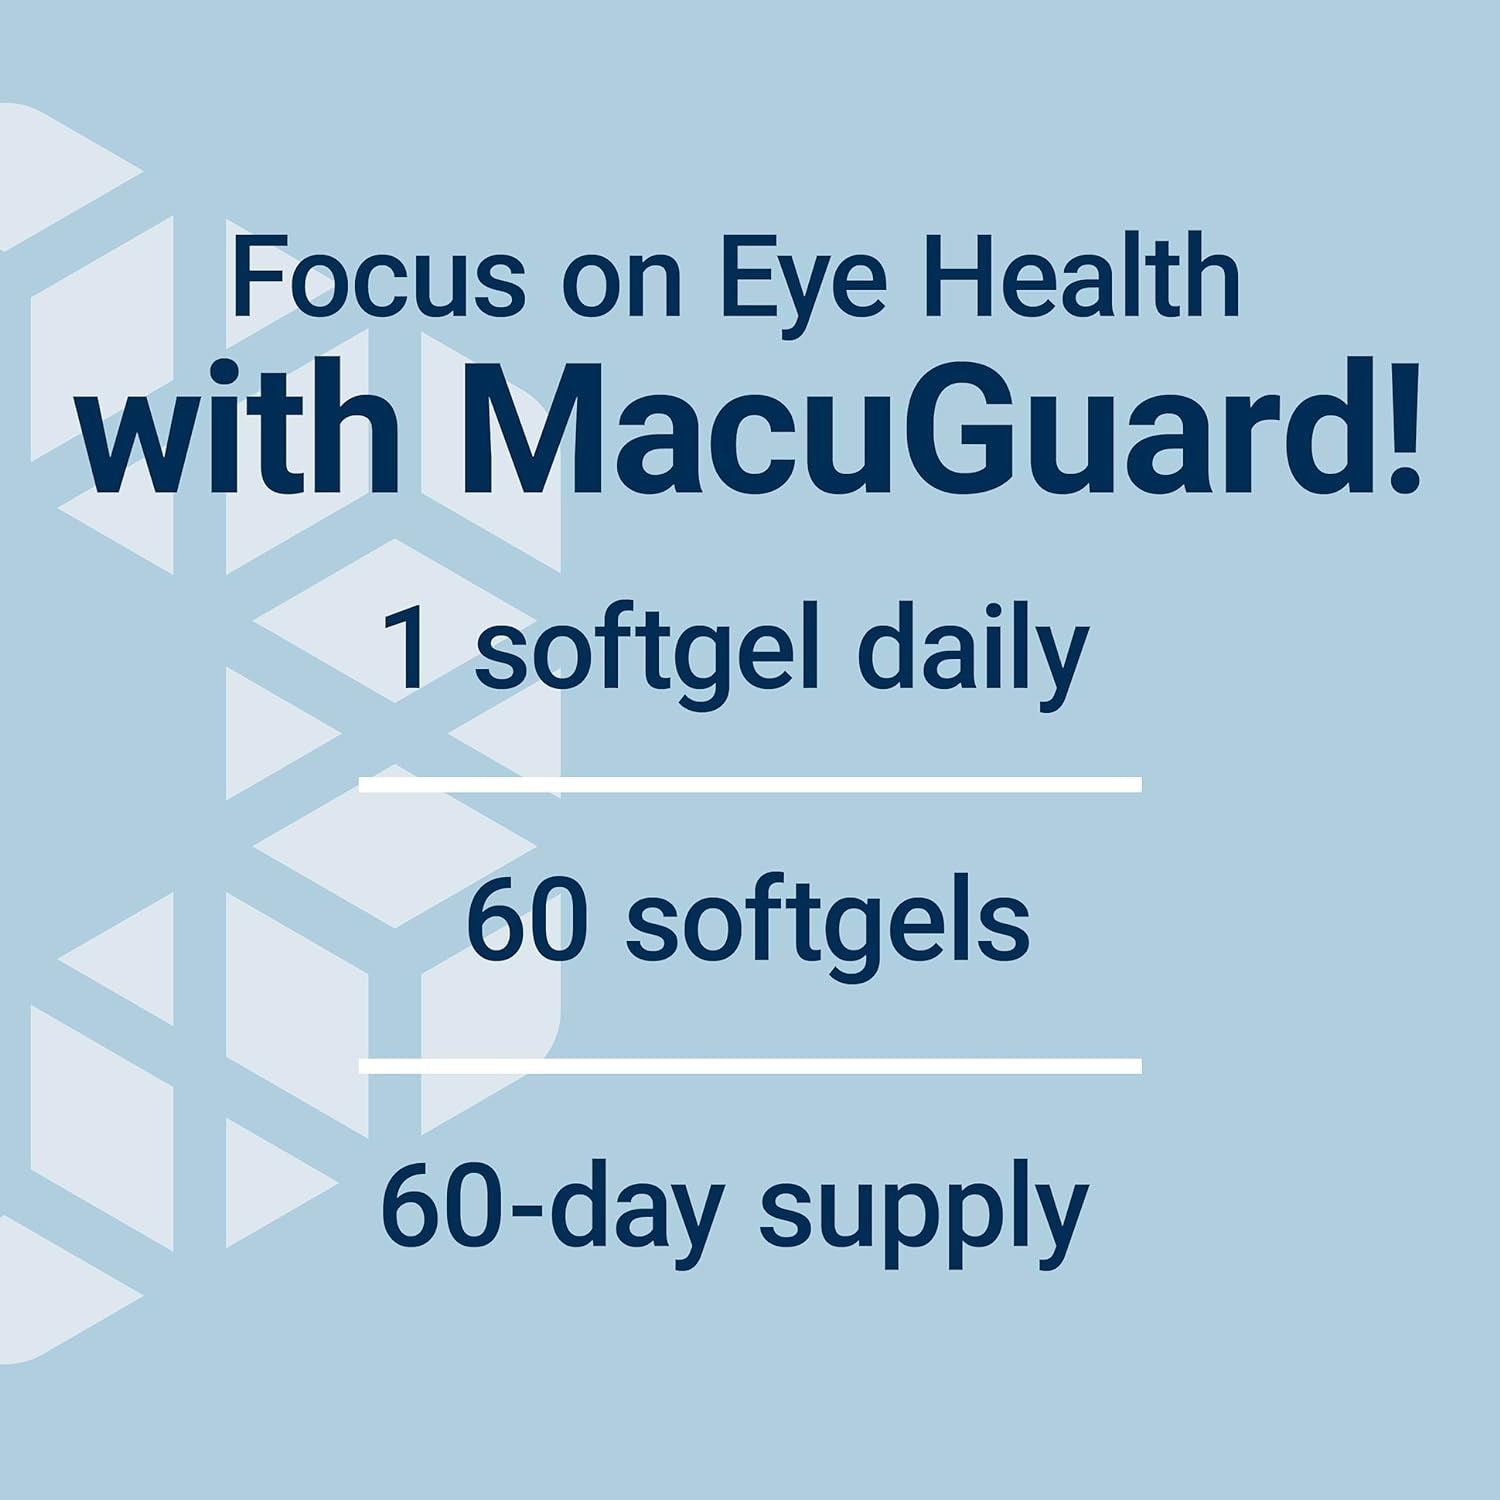 Life Extension Macuguard Ocular Support with Saffron & Astaxanthin - with Lutein, Meso-Zeaxanthin - Eye Health Supplement Â€“ Once-Daily, Non-Gmo, Gluten-Free - 60 Count (Pack of 1)